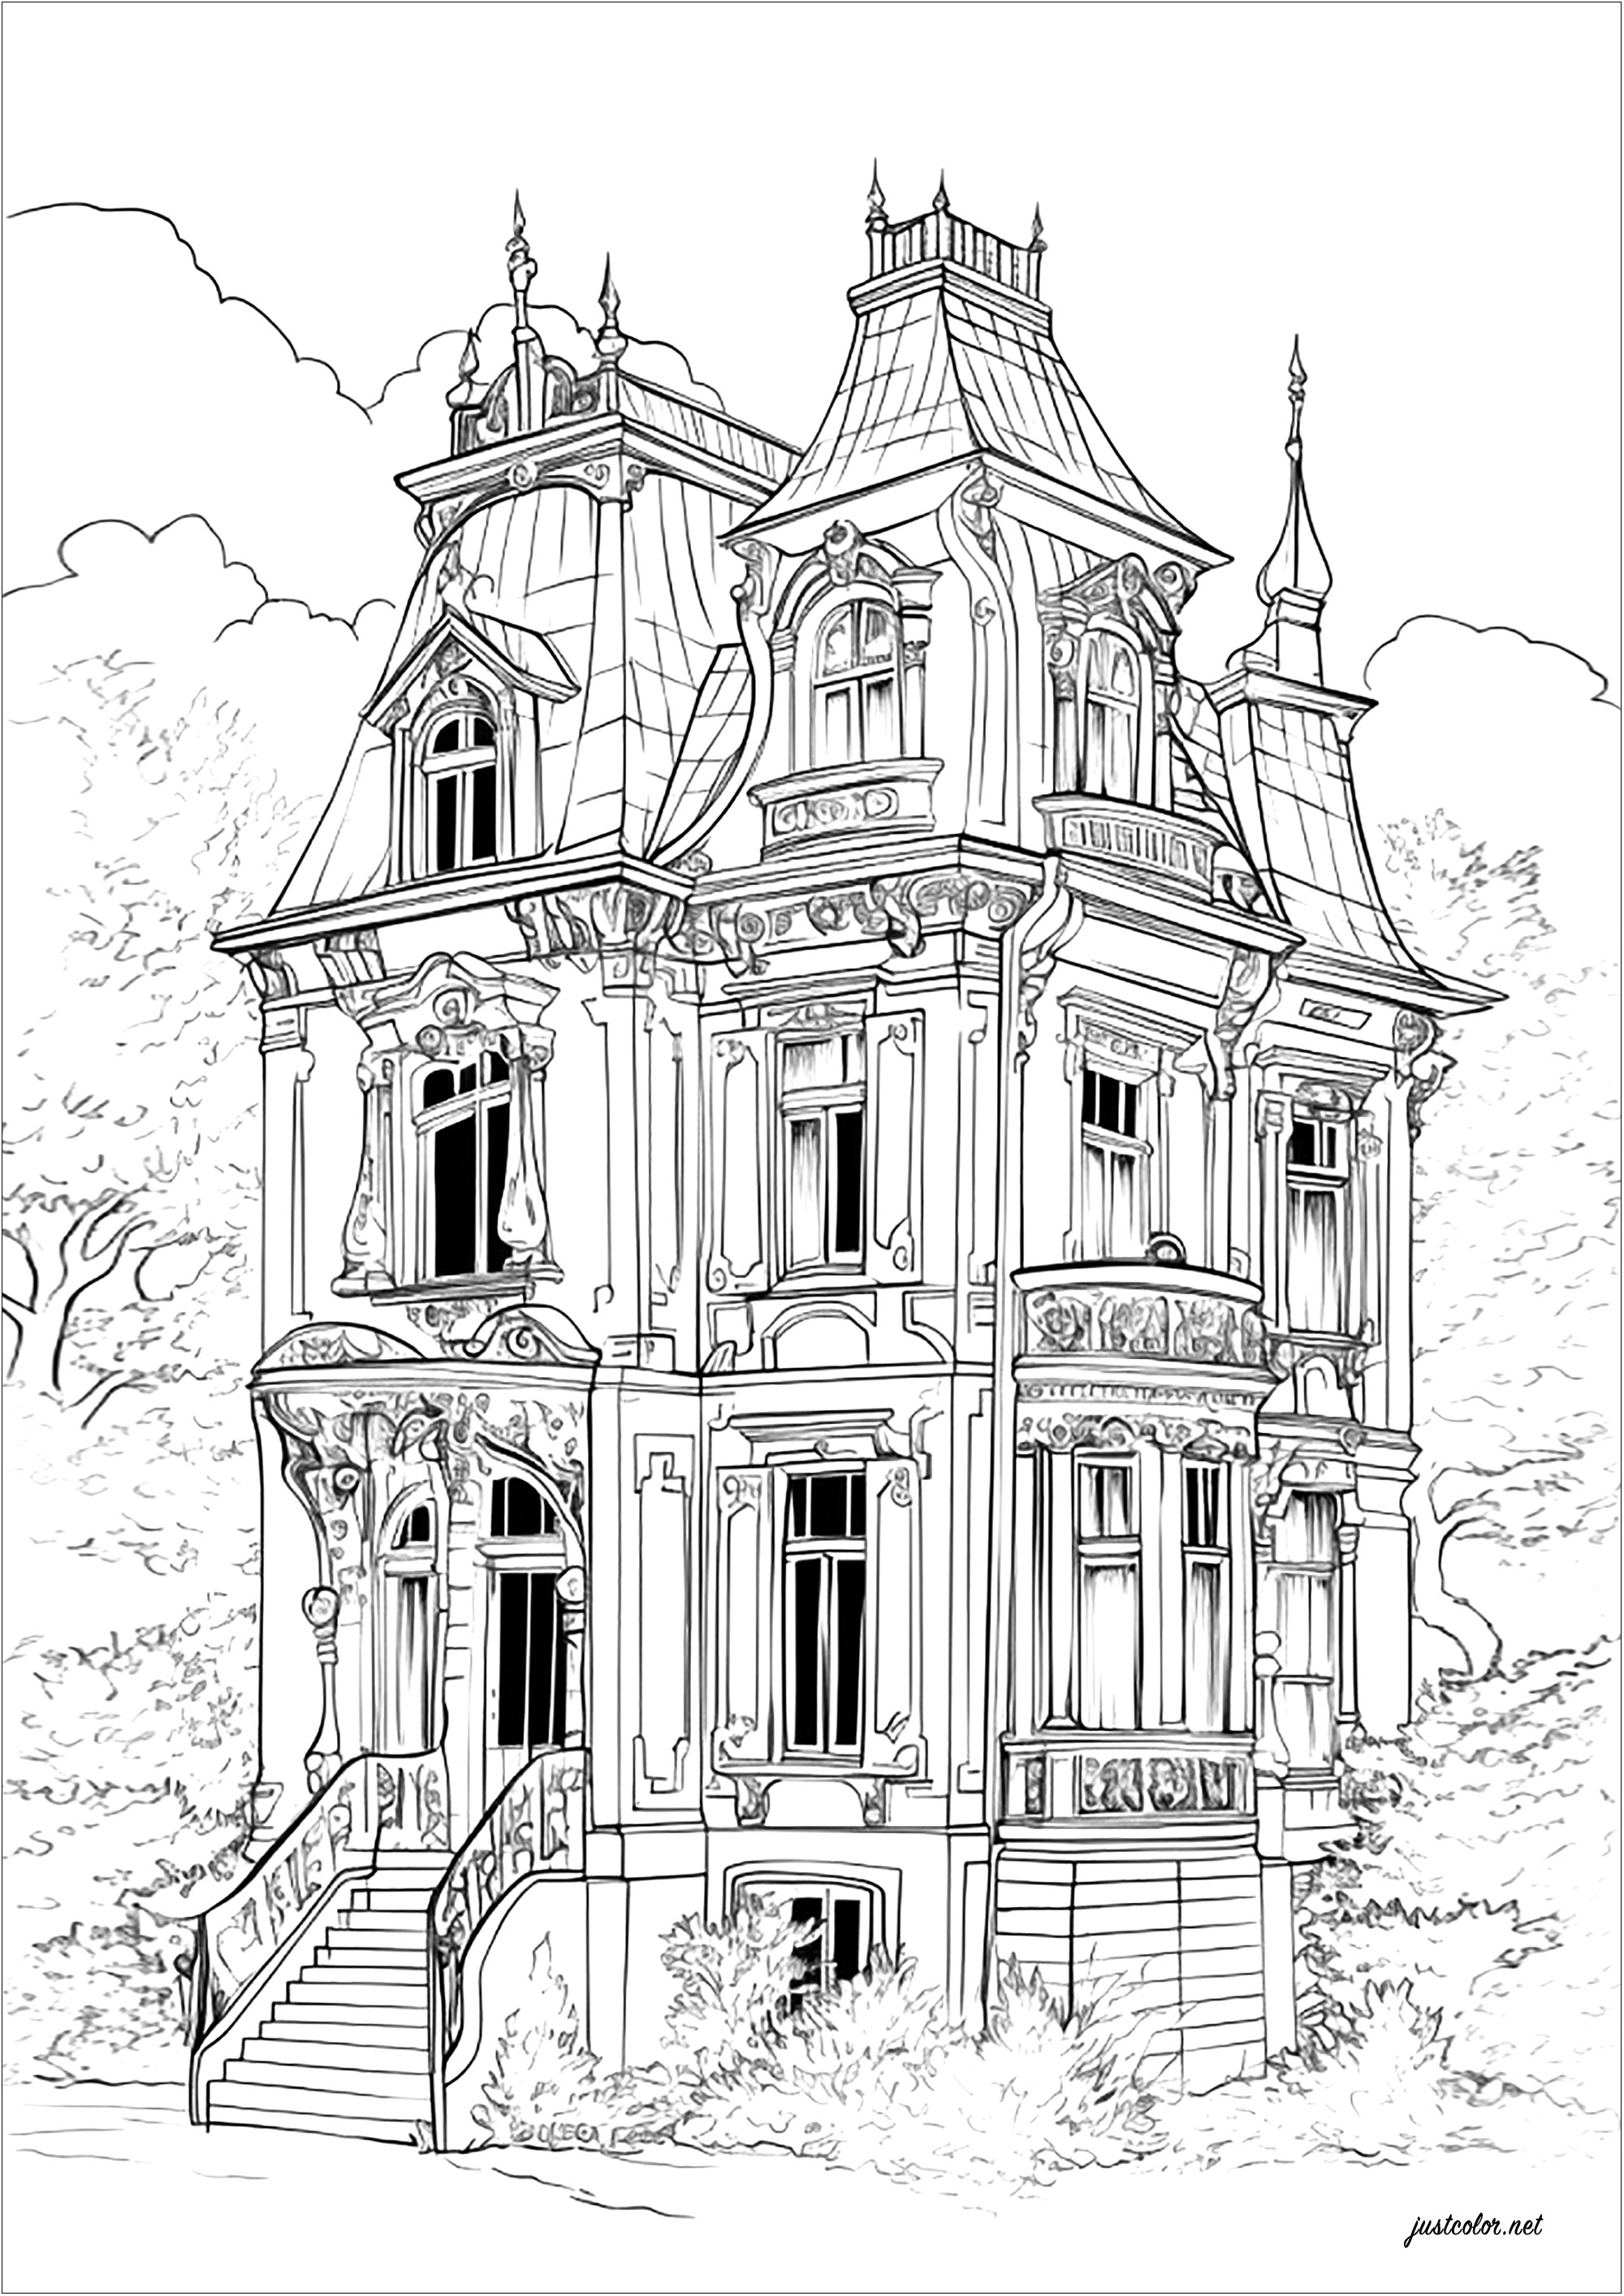 gloomy-house-halloween-adult-coloring-pages